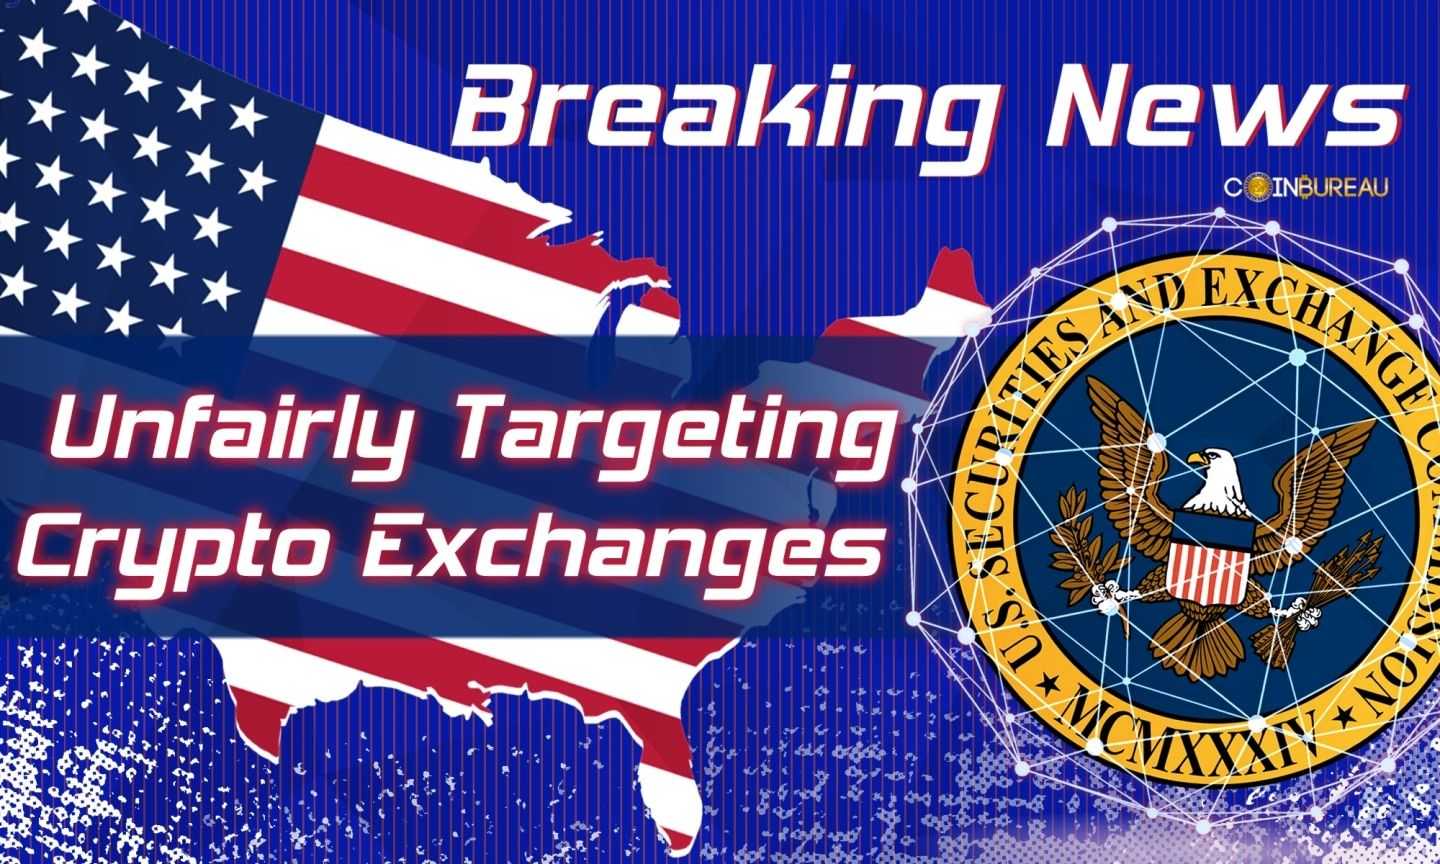 US Officials Slam SEC for Unfairly Targeting Crypto Exchanges in Latest Rule Change